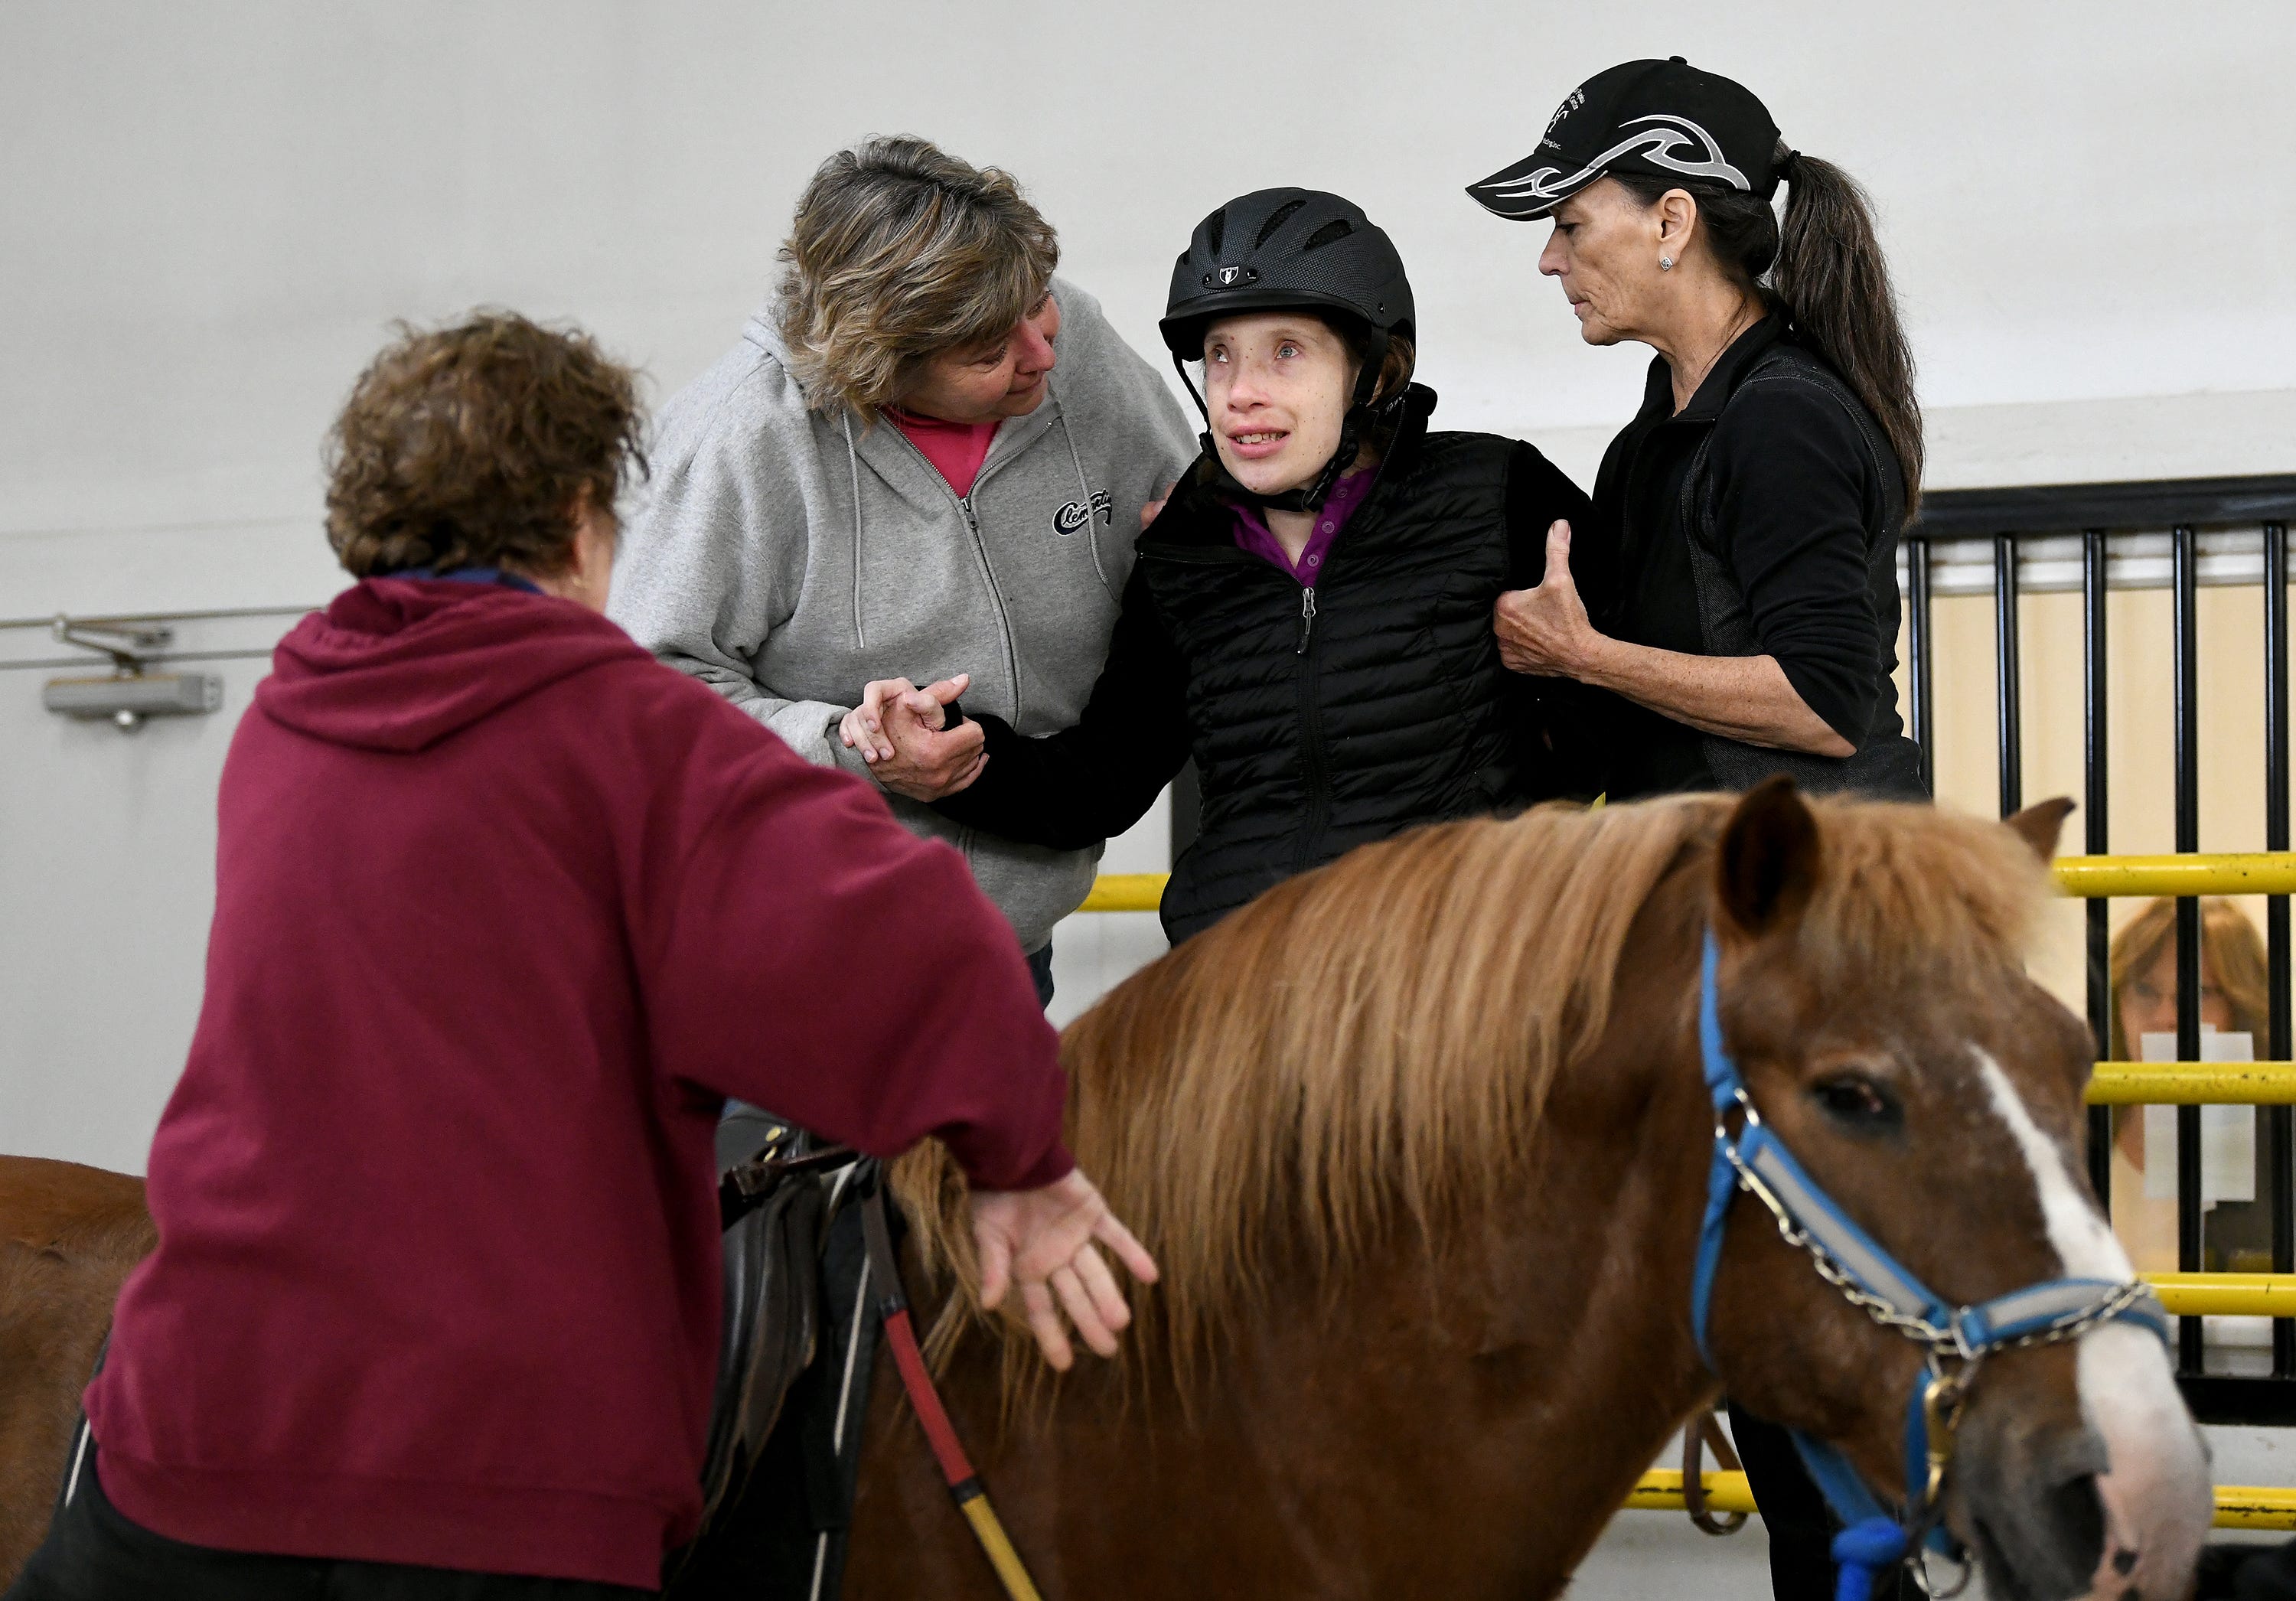 Jan Vescelius, right, Program Director and Head Instructor of Therapeutic Riding Inc., helps rider Elizabeth Lerchin onto Miko, with the help of volunteers Louise Moore, top left, and Merrily Hart.